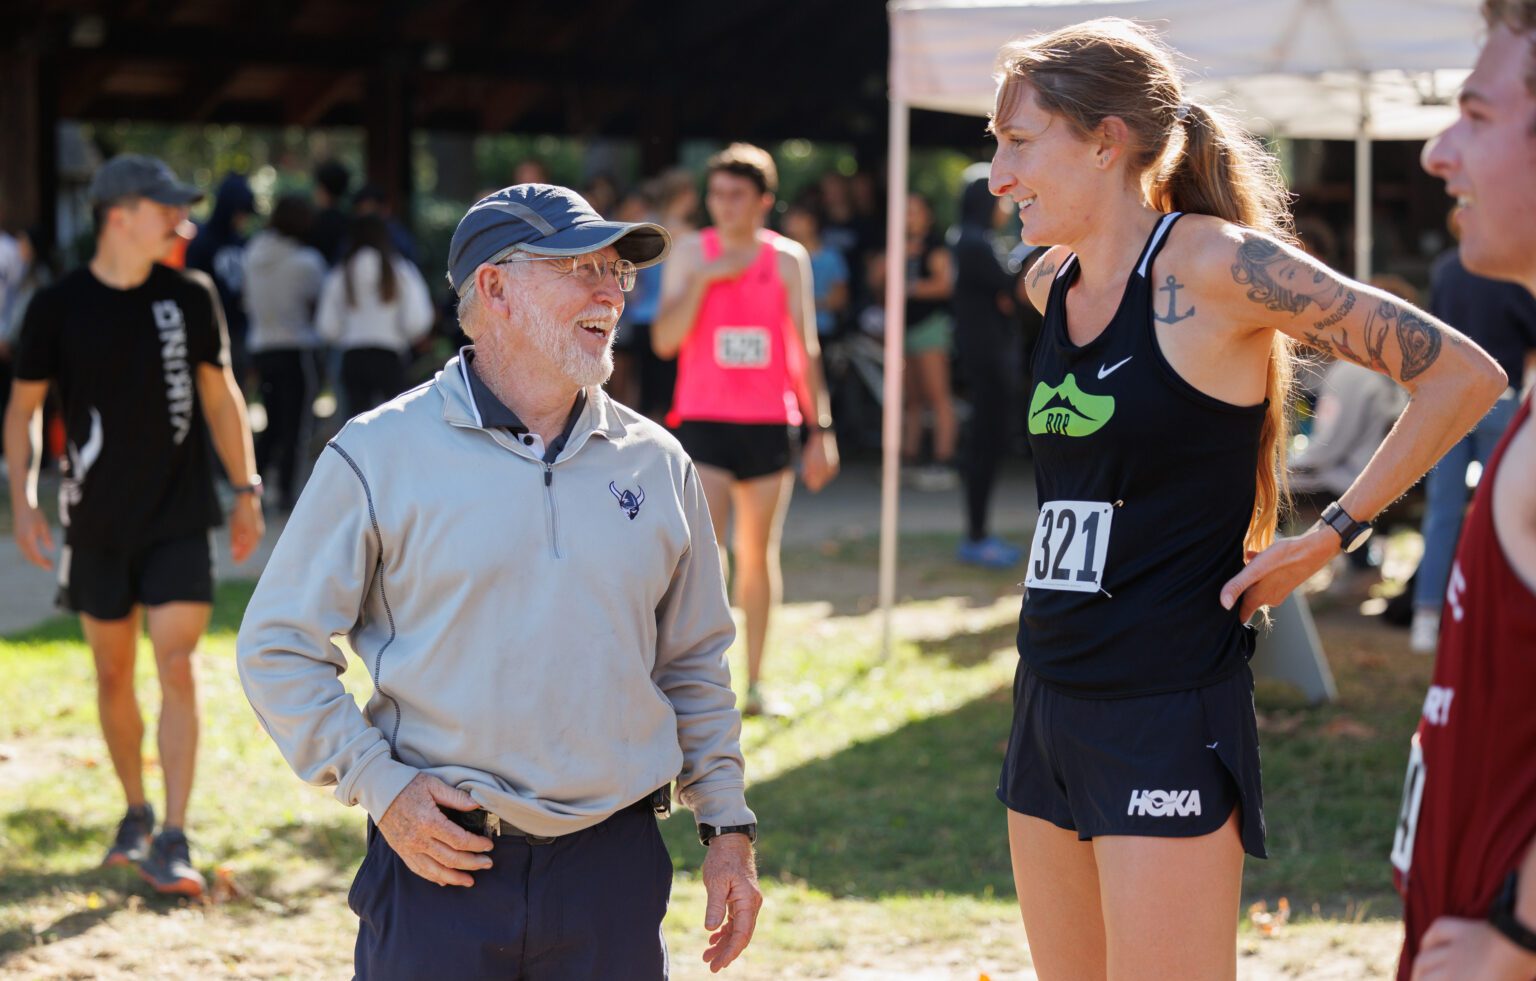 Western Washington University cross country head coach Pee Wee Halsell laughs with former Western runner Courtney Olsen before the women’s race of the Bill Roe Classic on Sept. 24